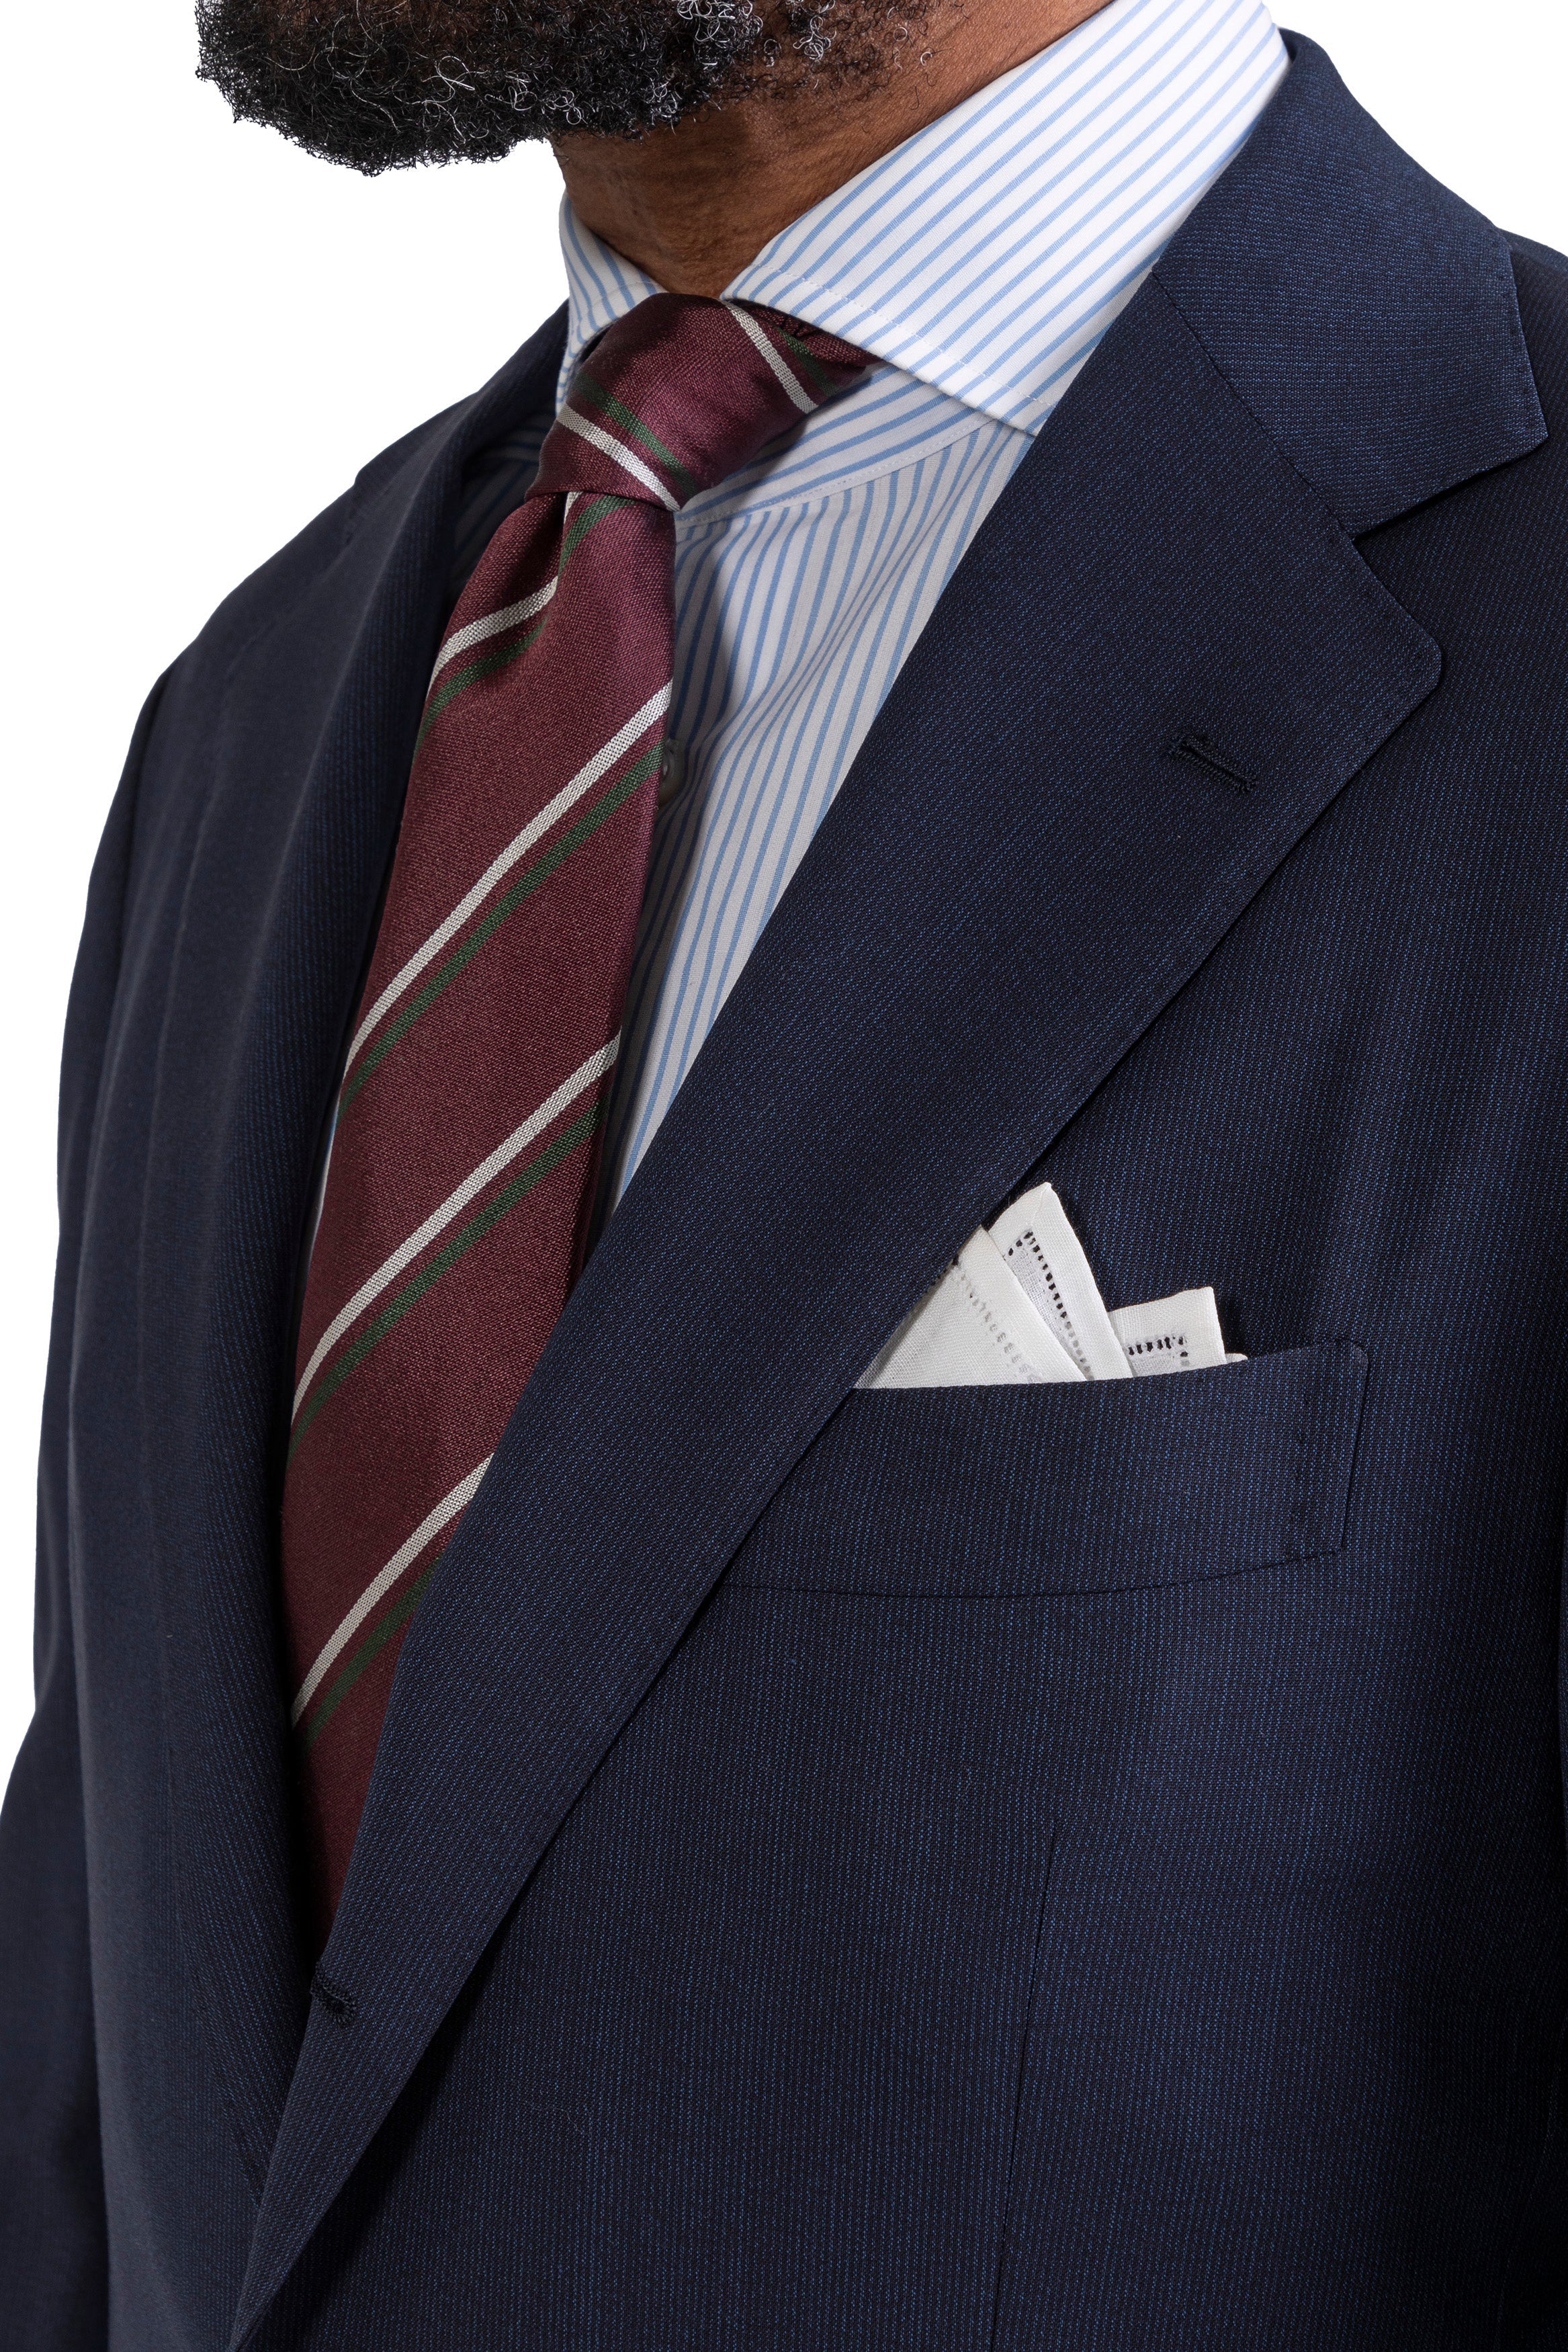 The Armoury Model 3A Navy Blue Wool Mini Stripe Suit